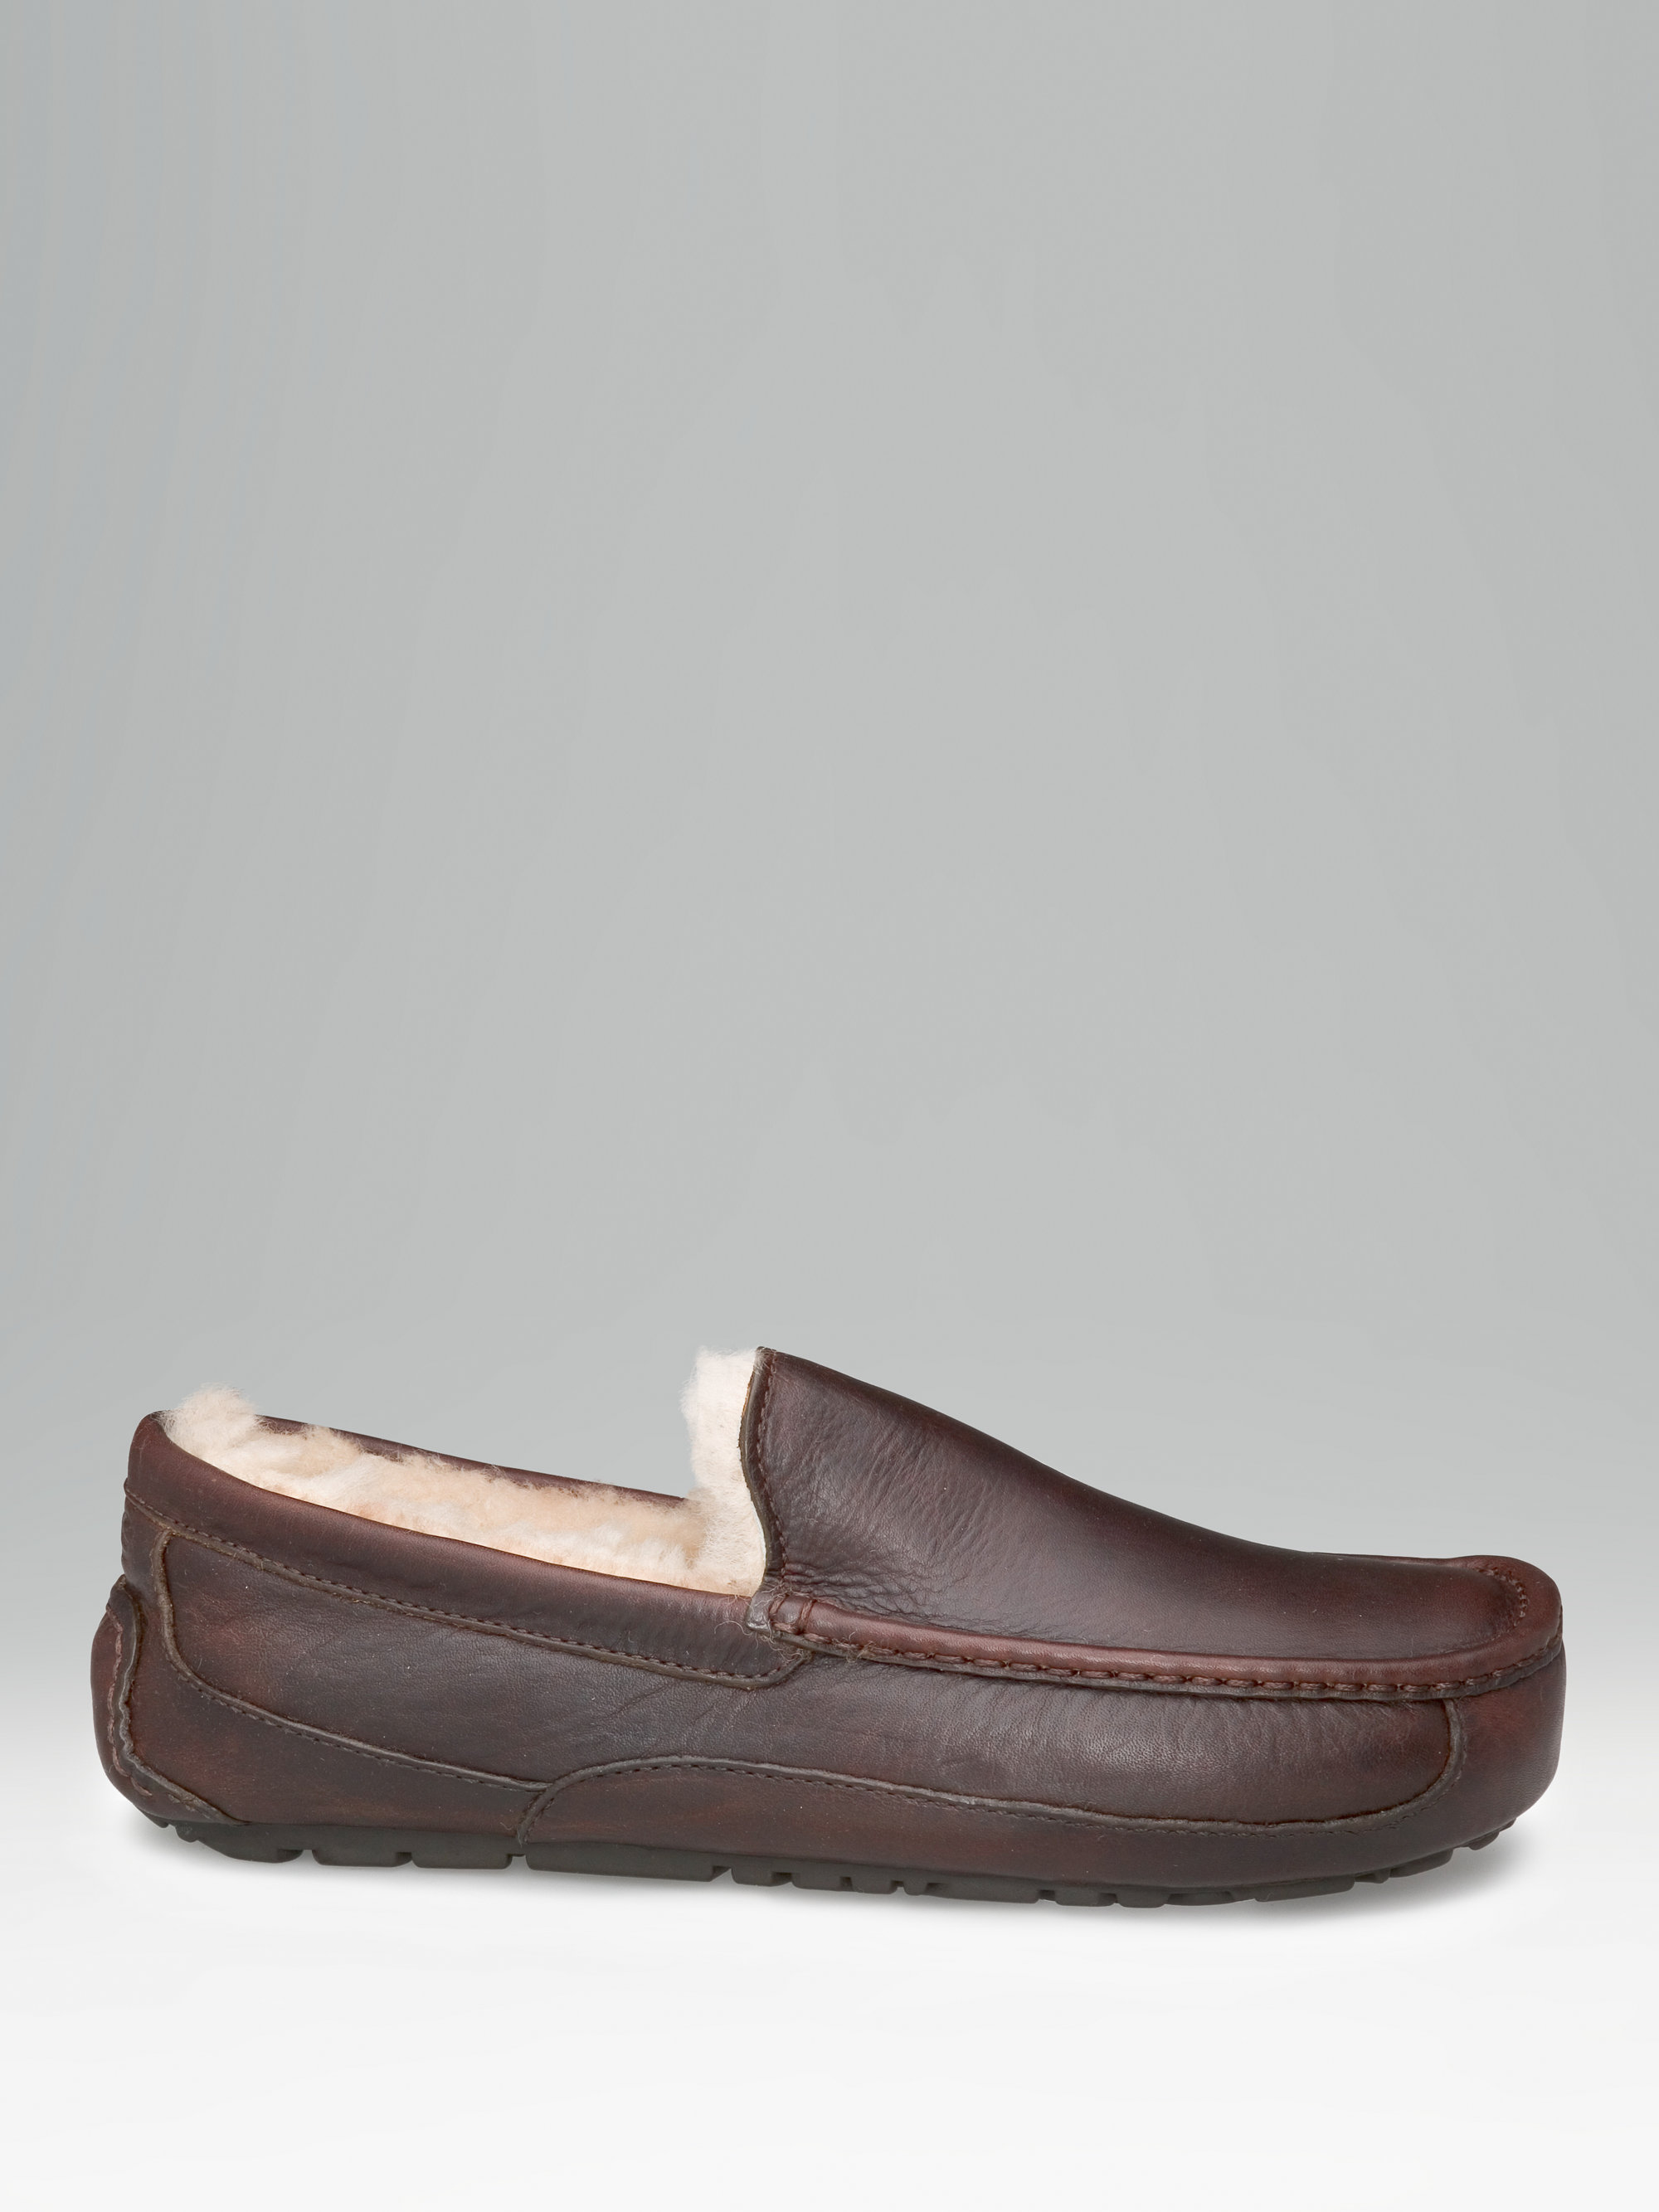 leather ugg mens slippers